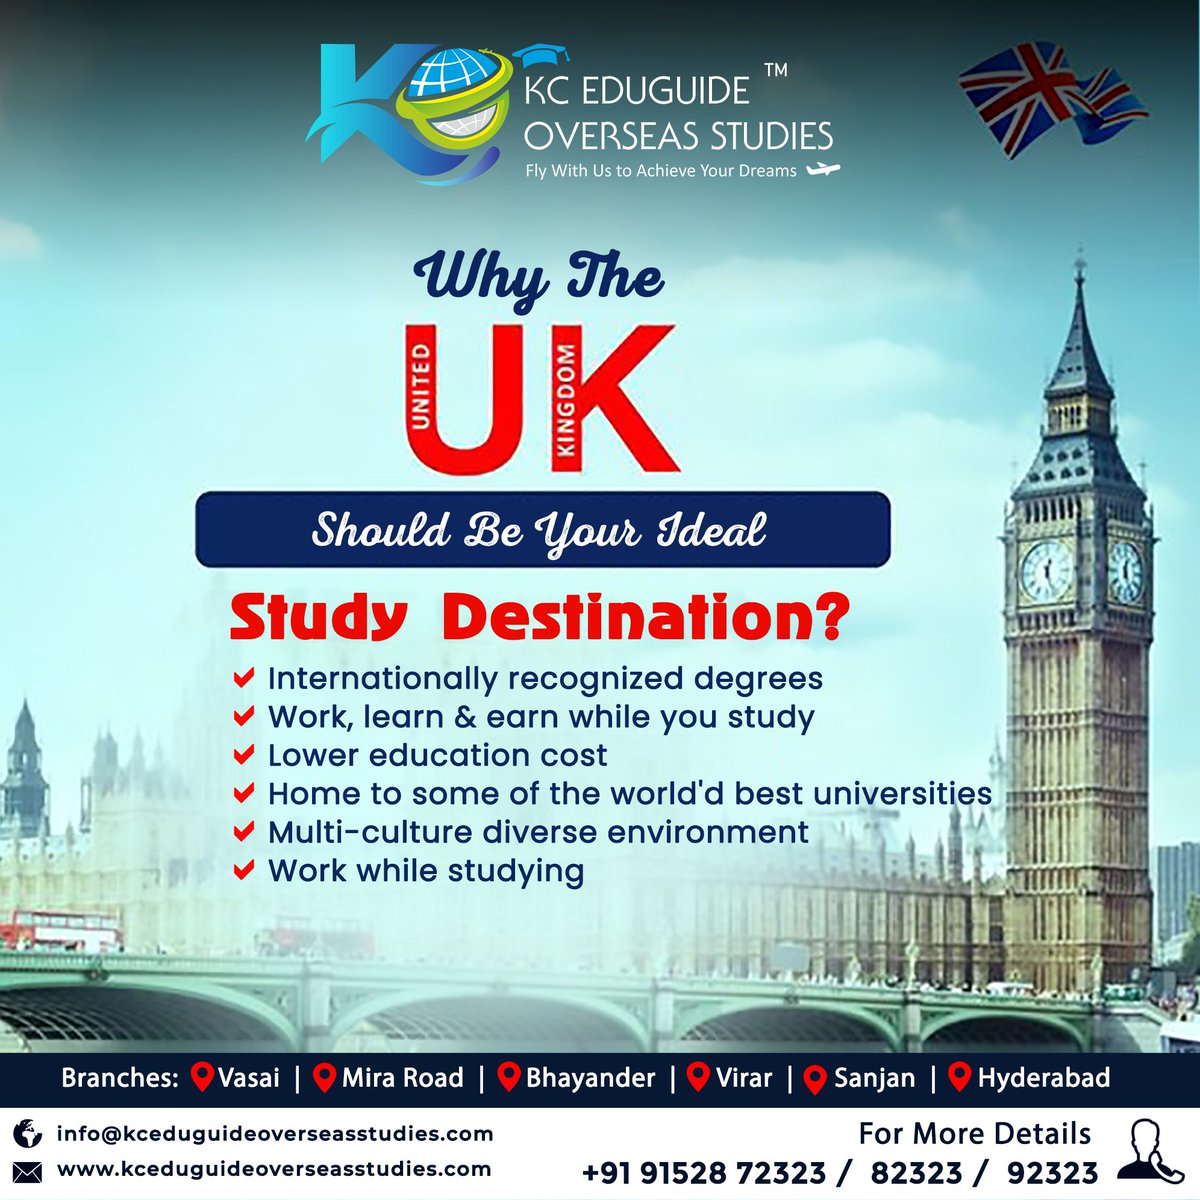 Unlocking the world through education! Here's your step-by-step guide to studying abroad

#UKstudyabroad #ukvisa #ukintake #studyabroad #globaleducation #studyabroadguide #studyabroadjourney #exploretheworld #discoveryourpassion #chartyourcourse #usuniversitie
#KCeduguideoverseas